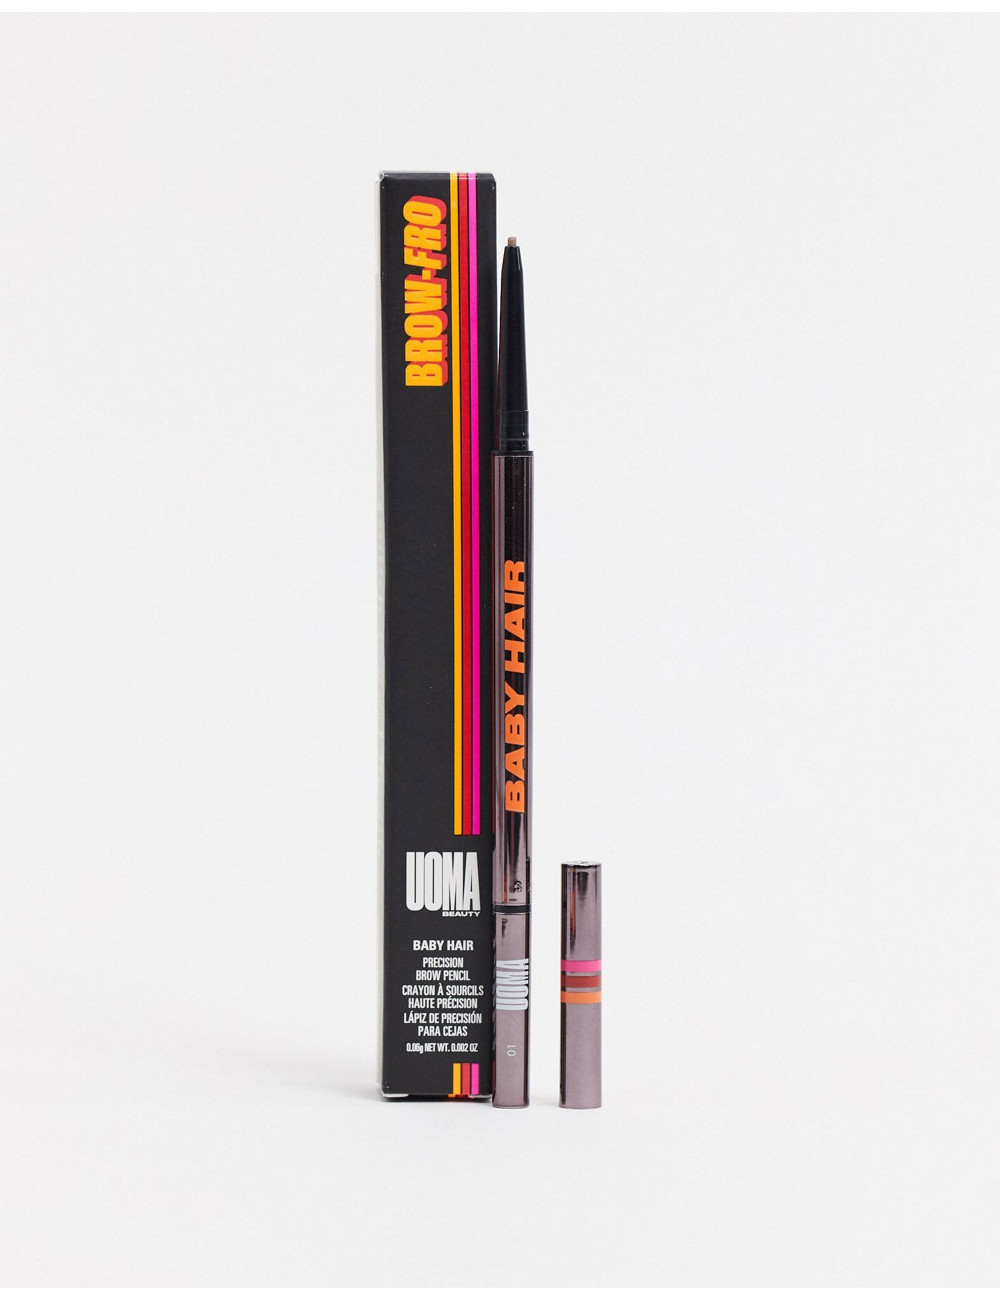 UOMA Beauty Brow- Fro...